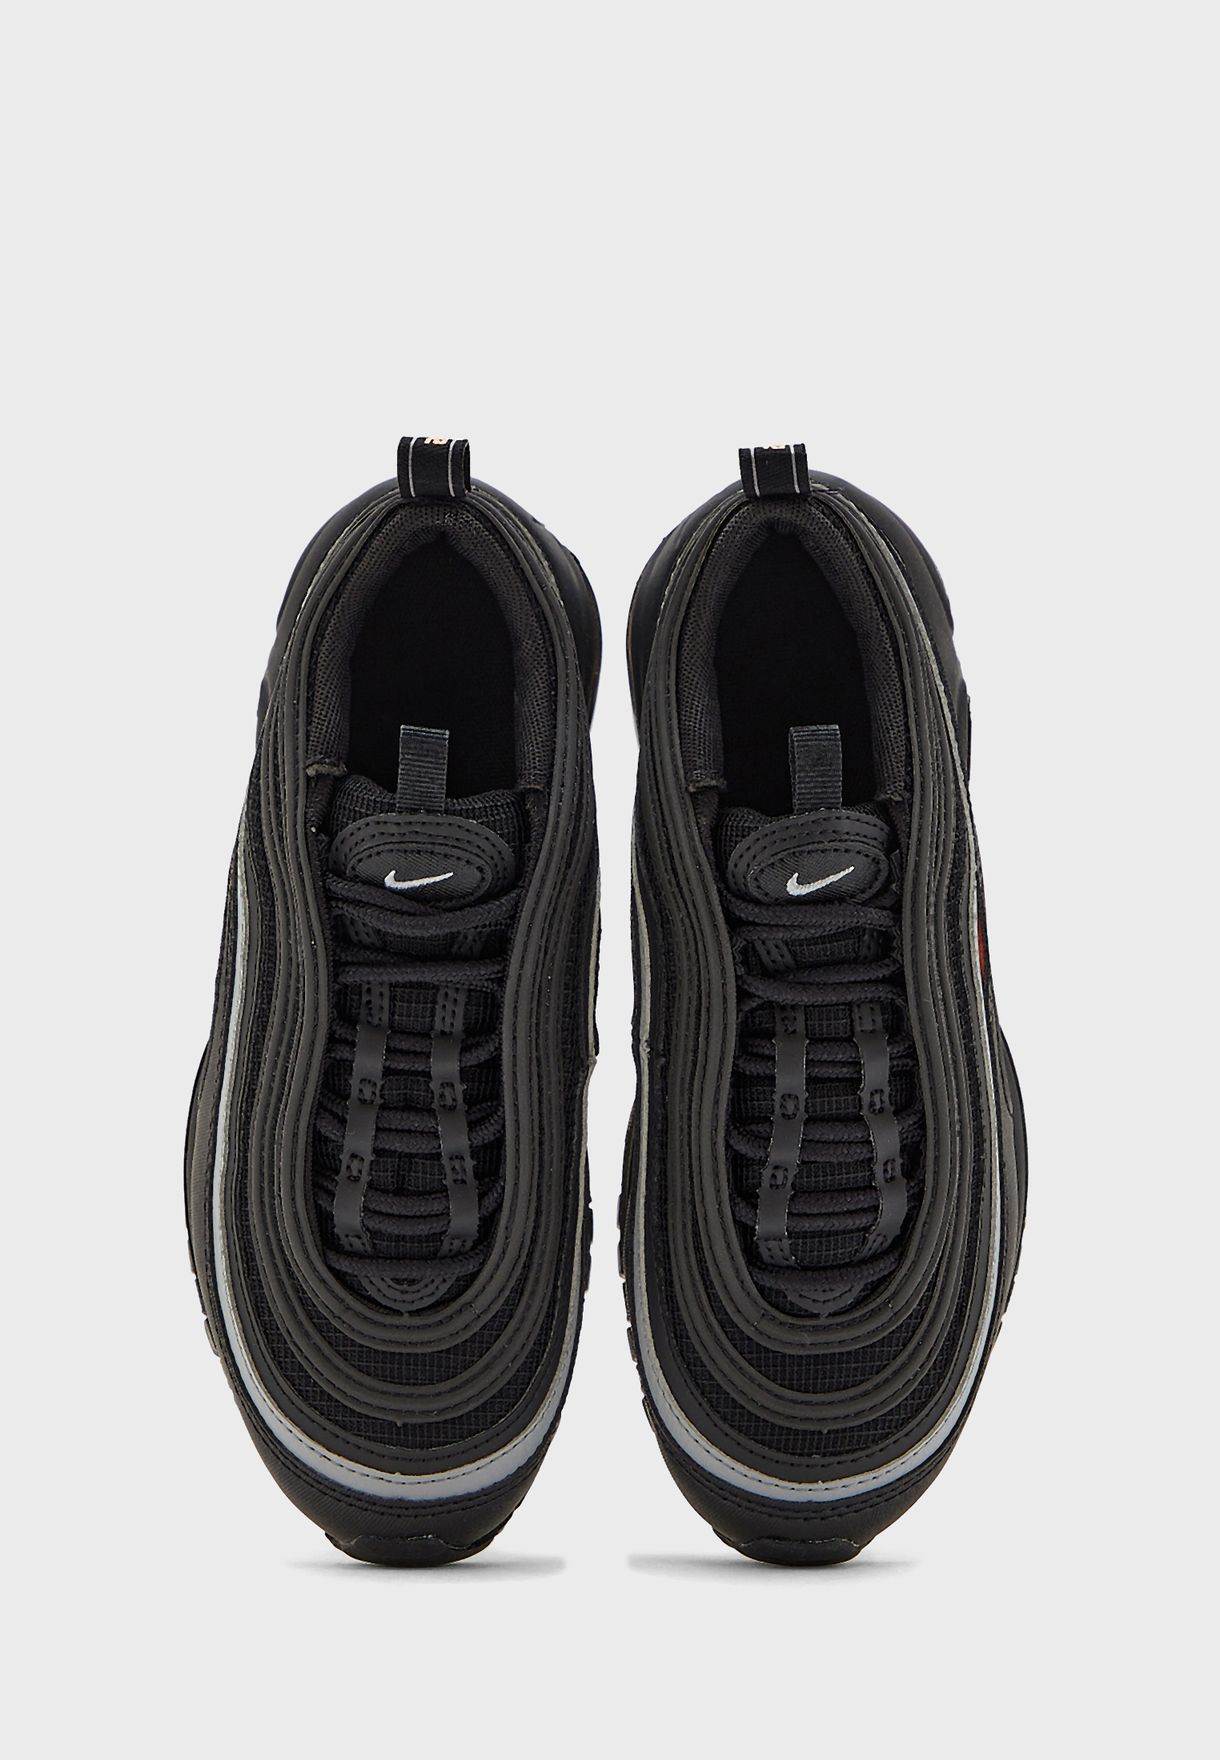 Youth Air Max 97 Gs Wc